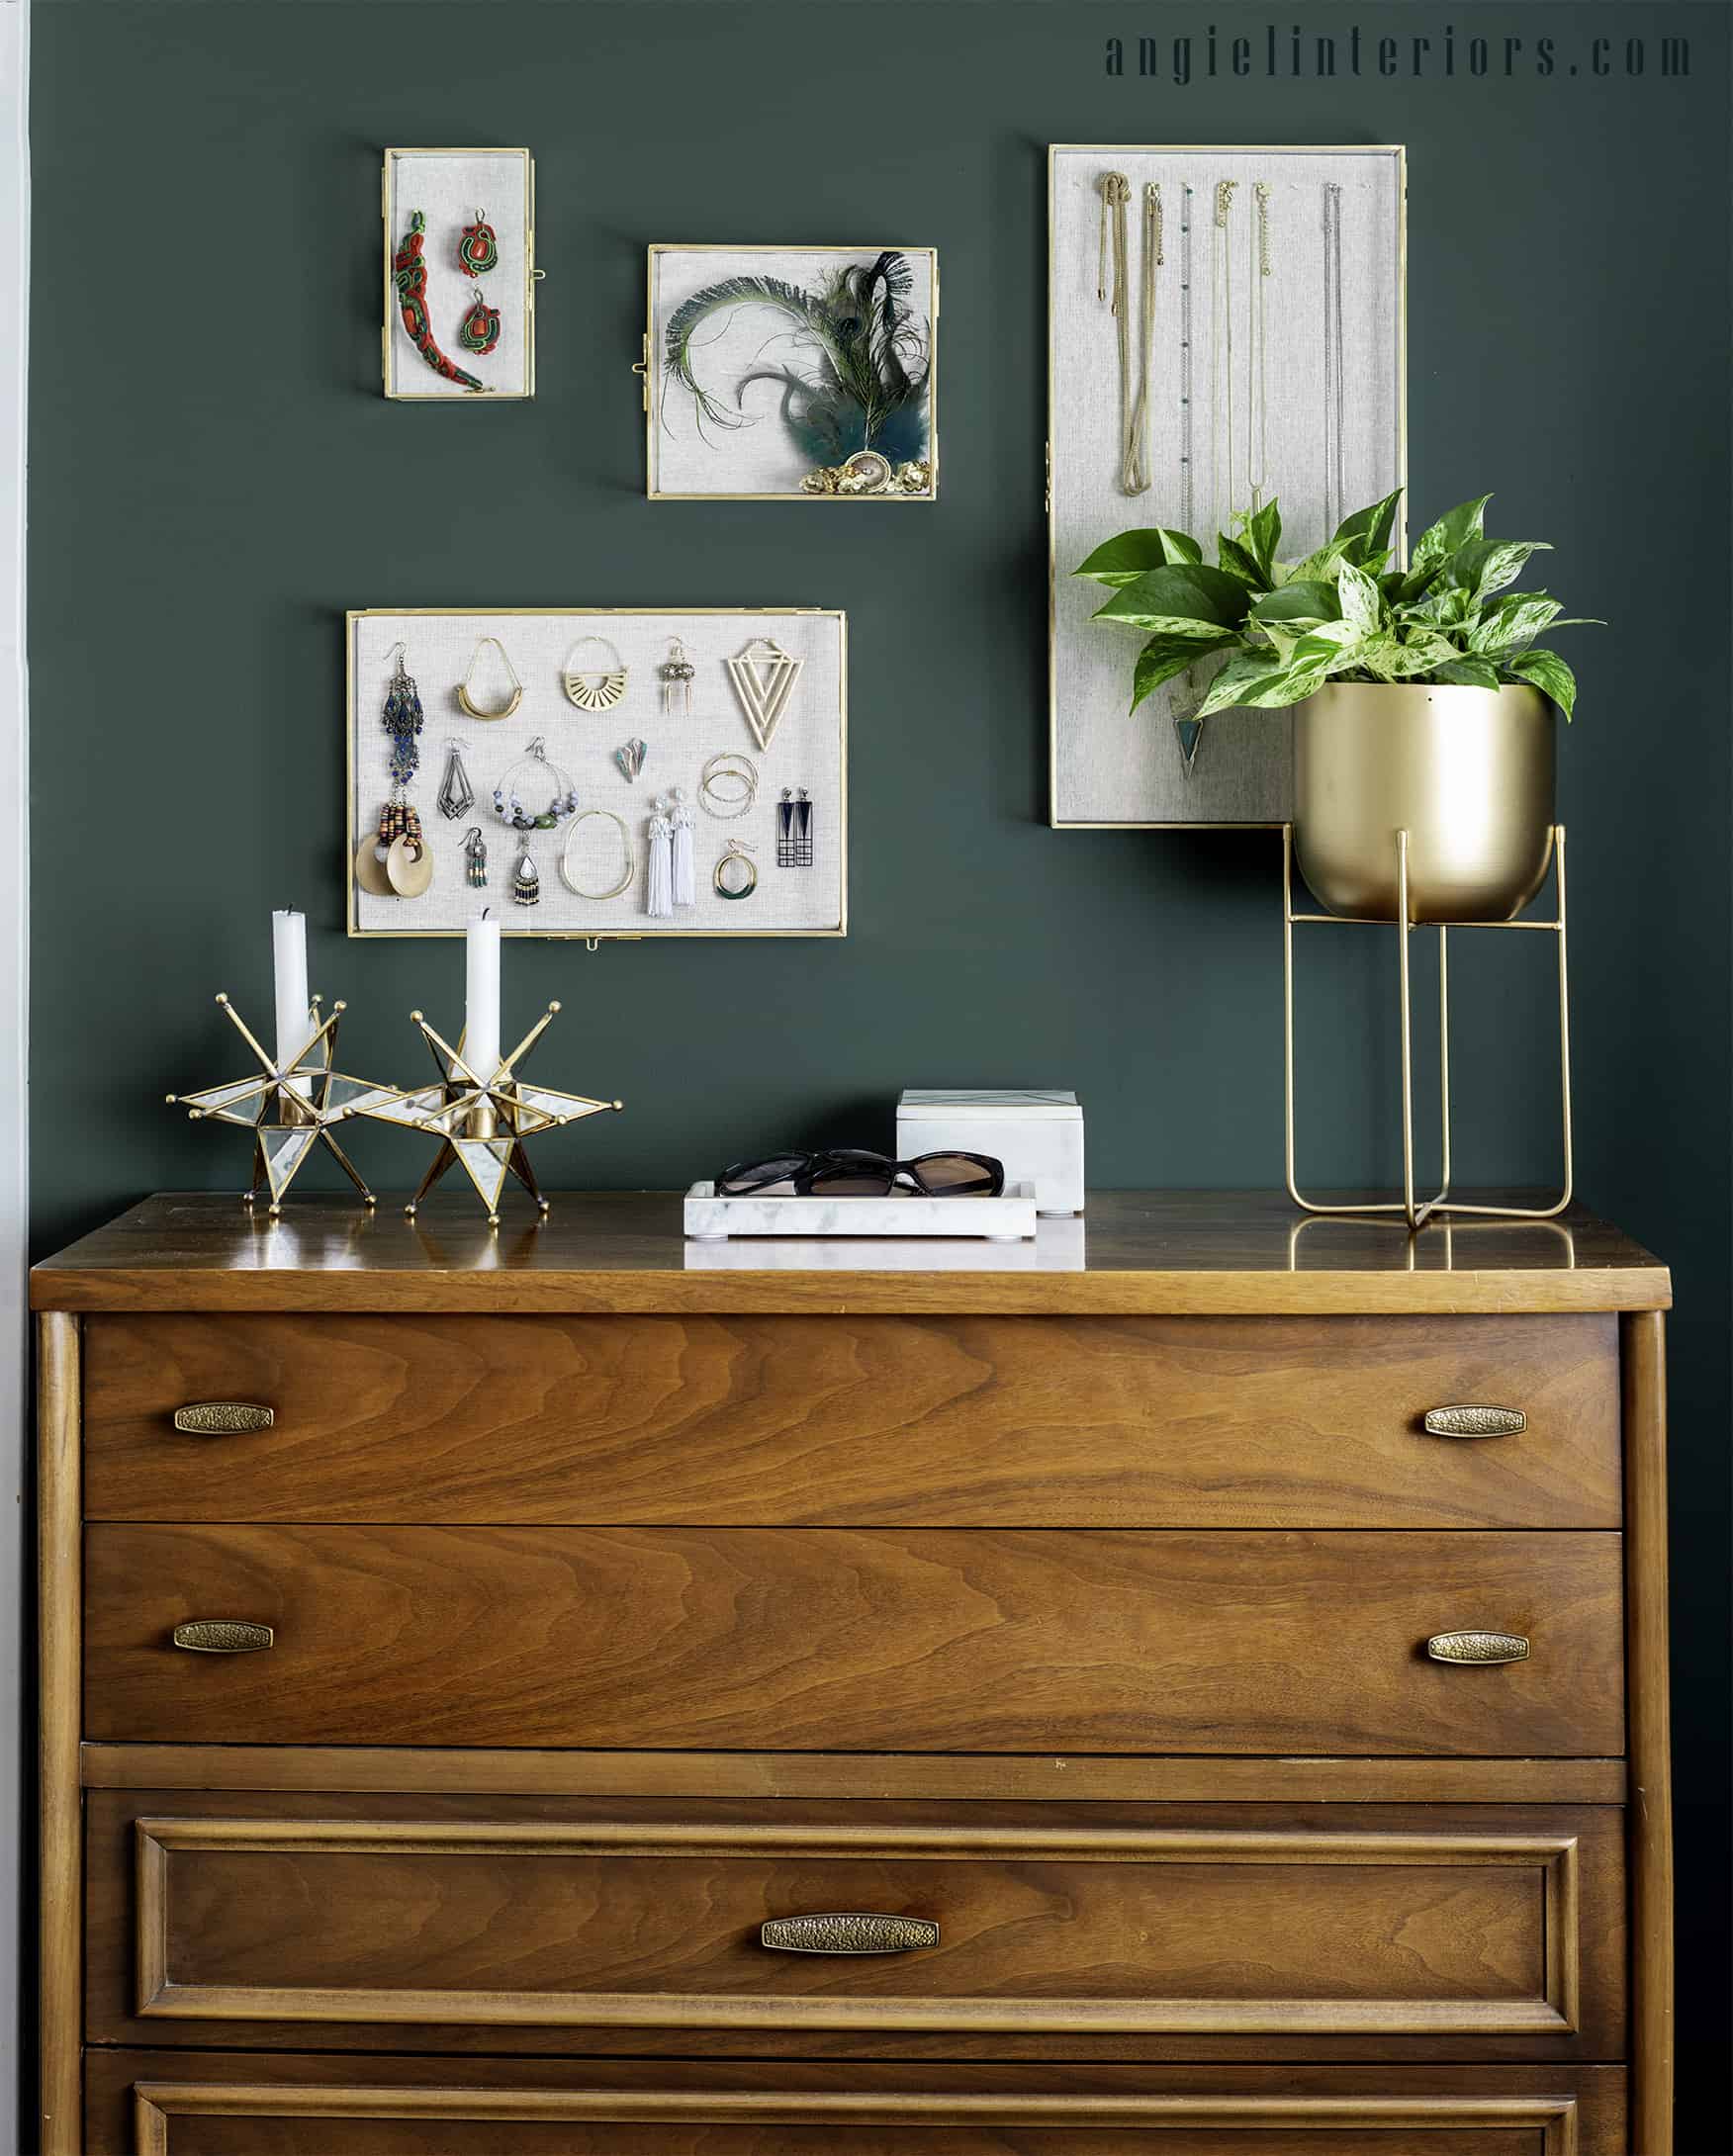 gold shadow boxes with jewelry hanging on a dark green wall over a wooden dresser